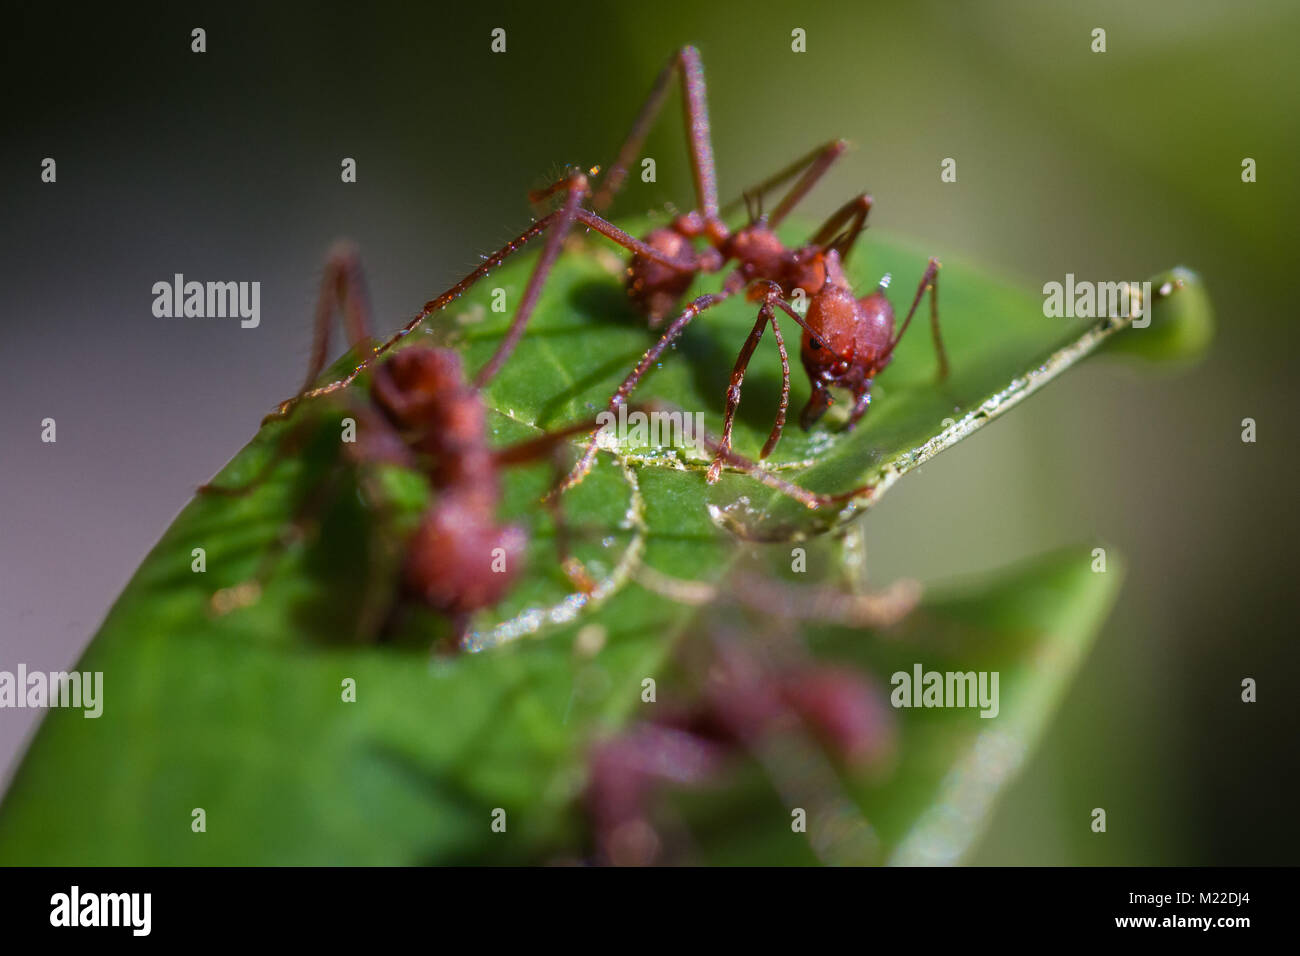 Leaf cutter ants stripping down a decorative plant in the Costa Rican rainforest Stock Photo